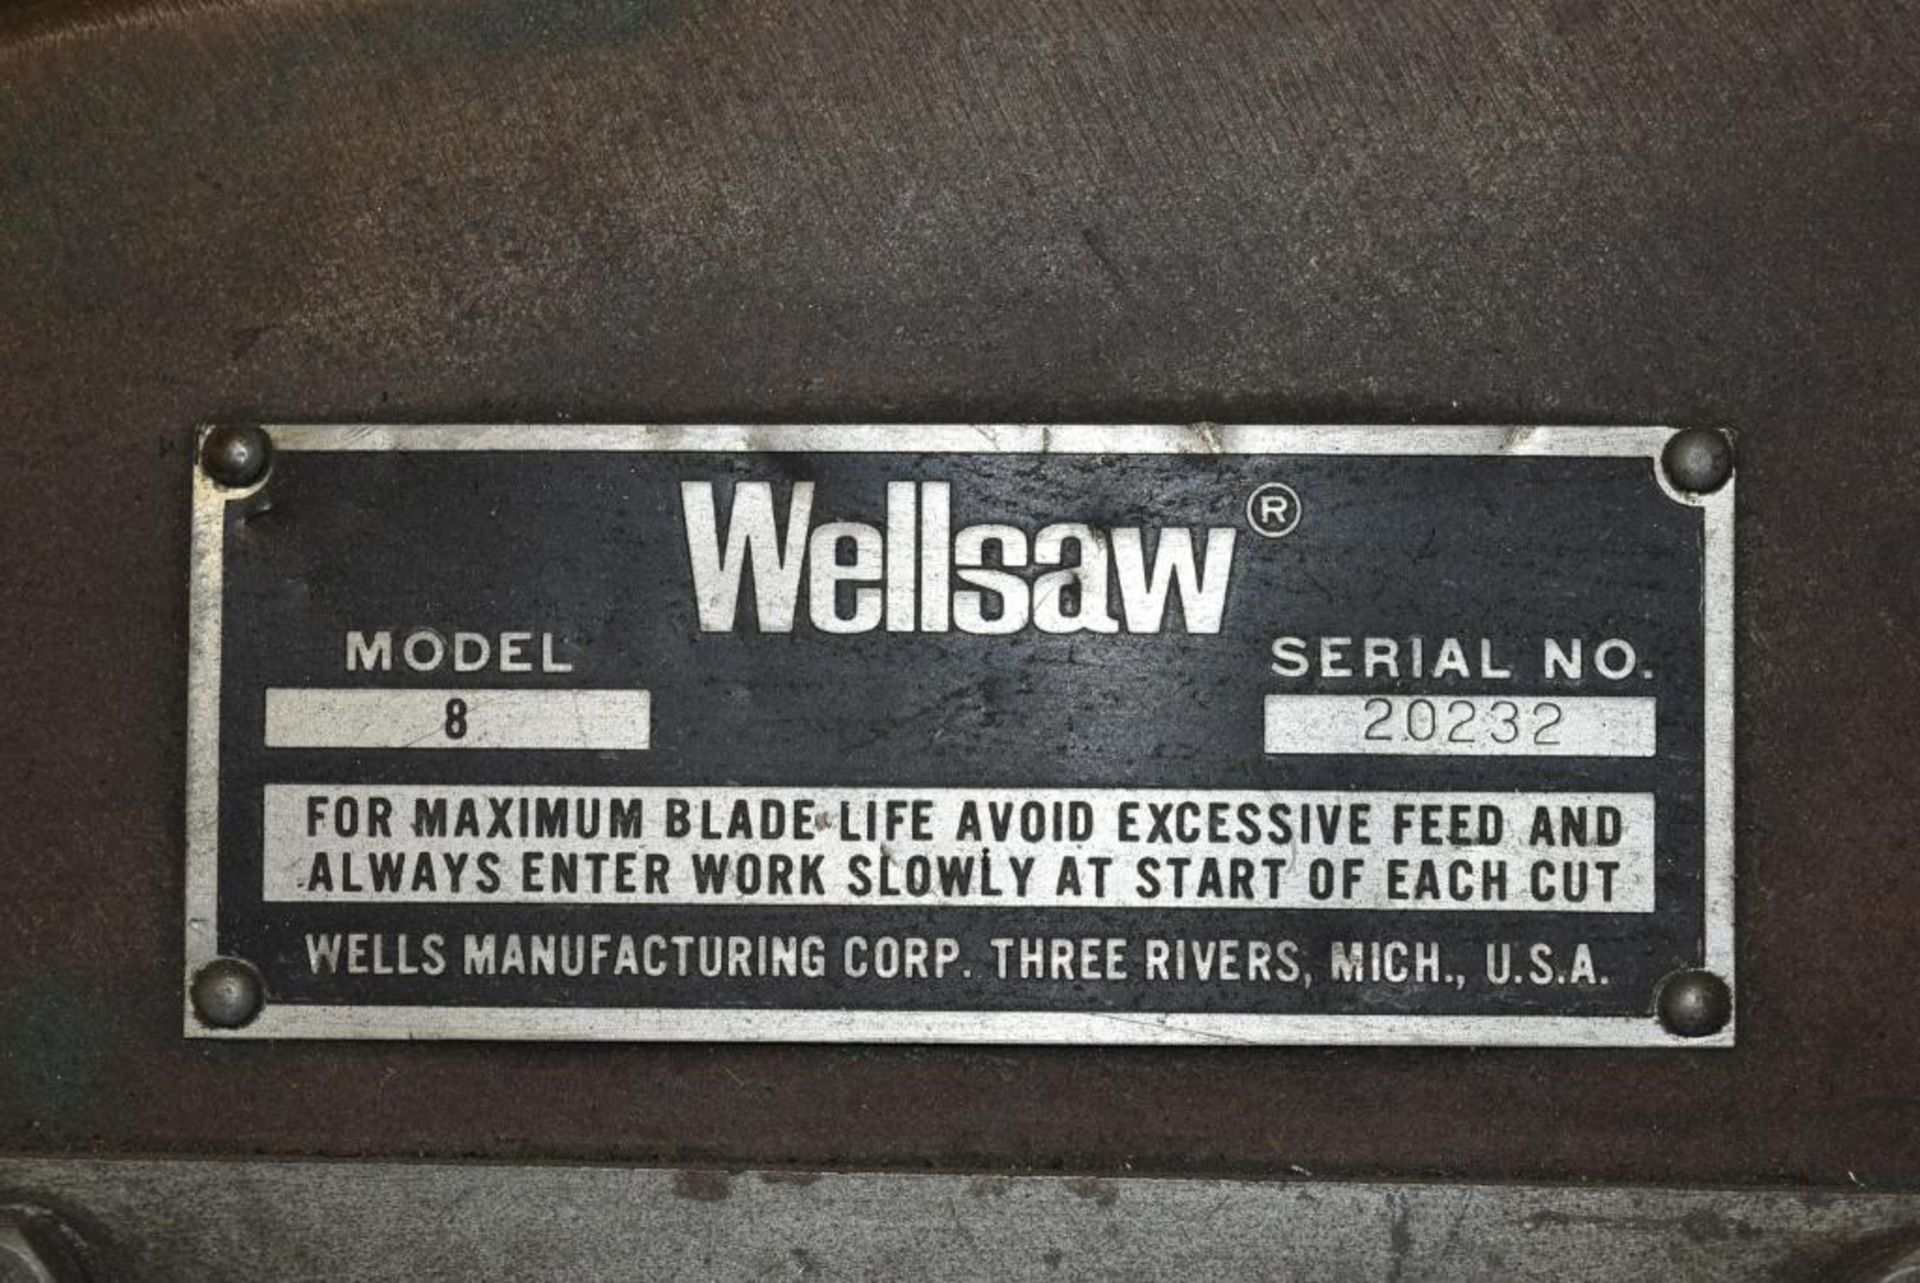 Well Saw 13" Model 8 Horizontal Bandsaw **Rite Industrial Load Fee $175.00** - Image 4 of 5